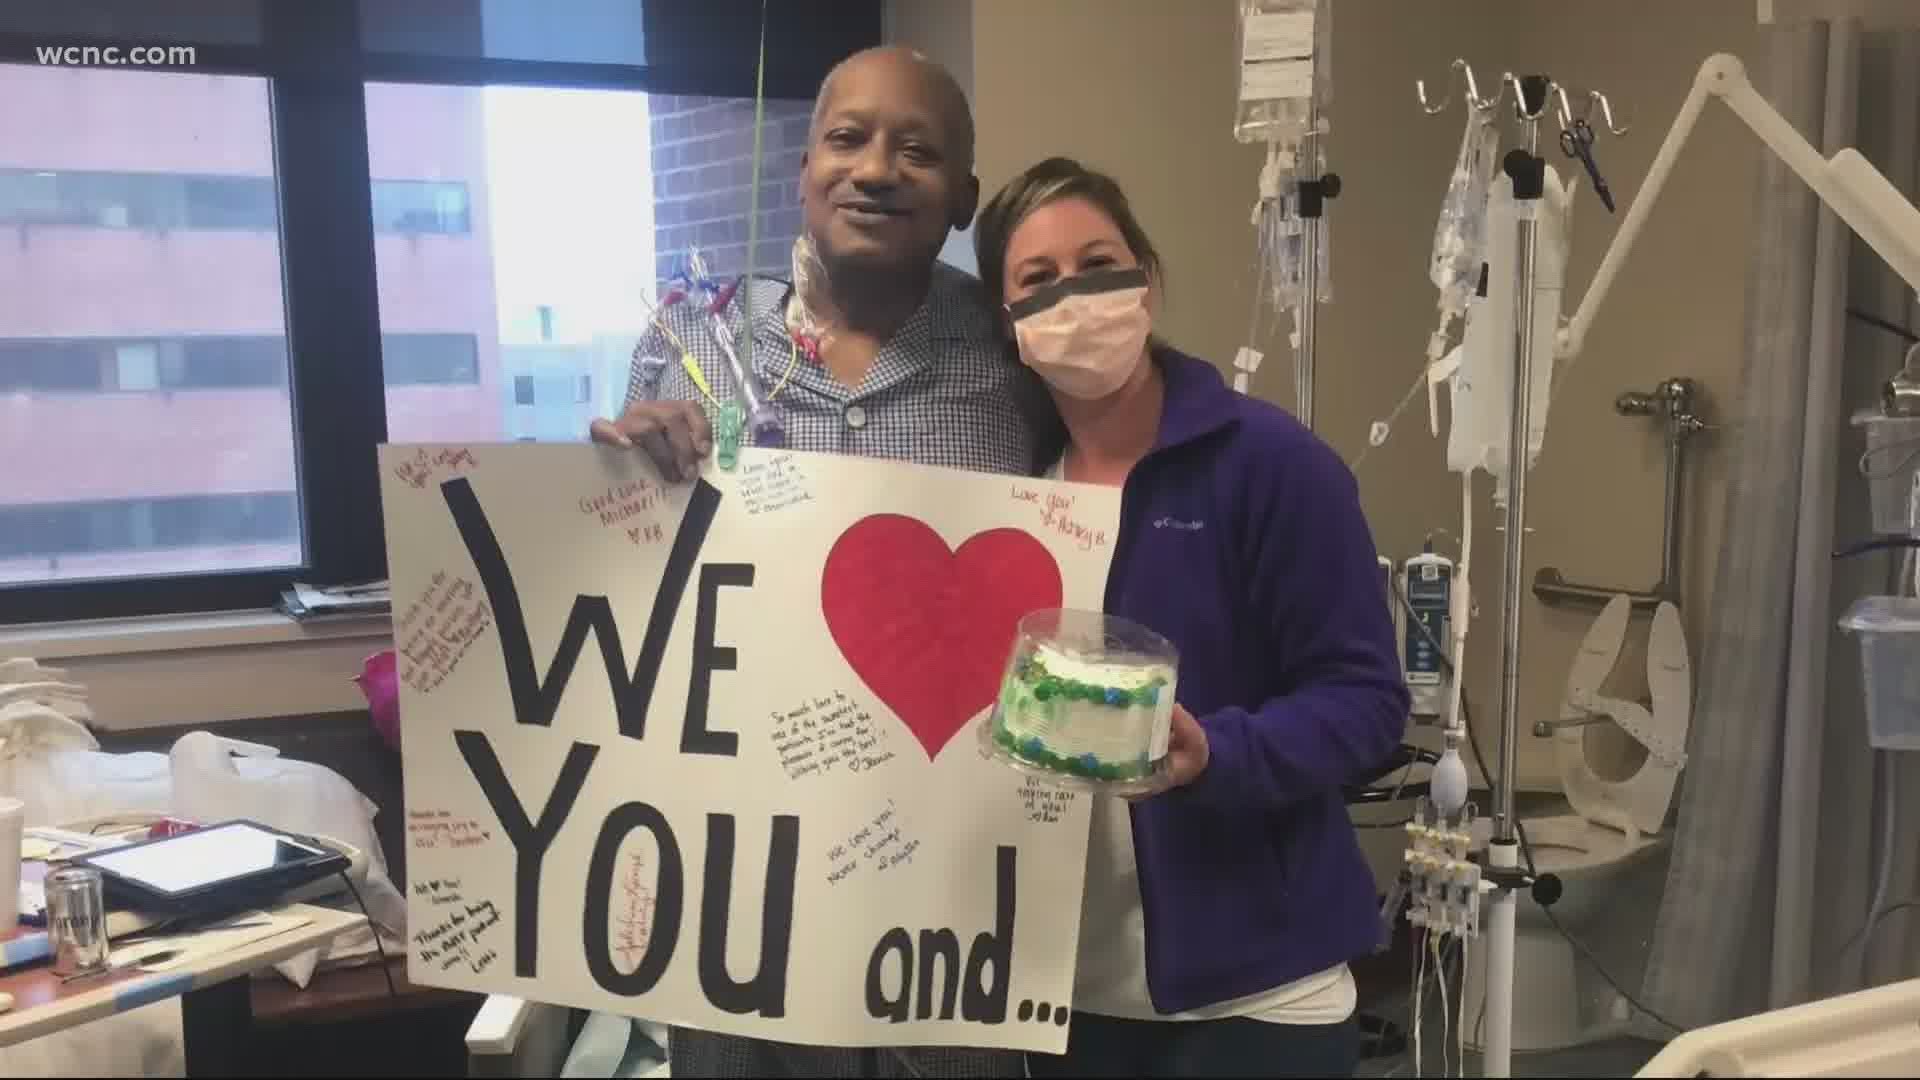 "There's love everywhere you just have to reach out and ask for it. Some people won't ask for it," said patient Michael Sloan after surviving heart attack.